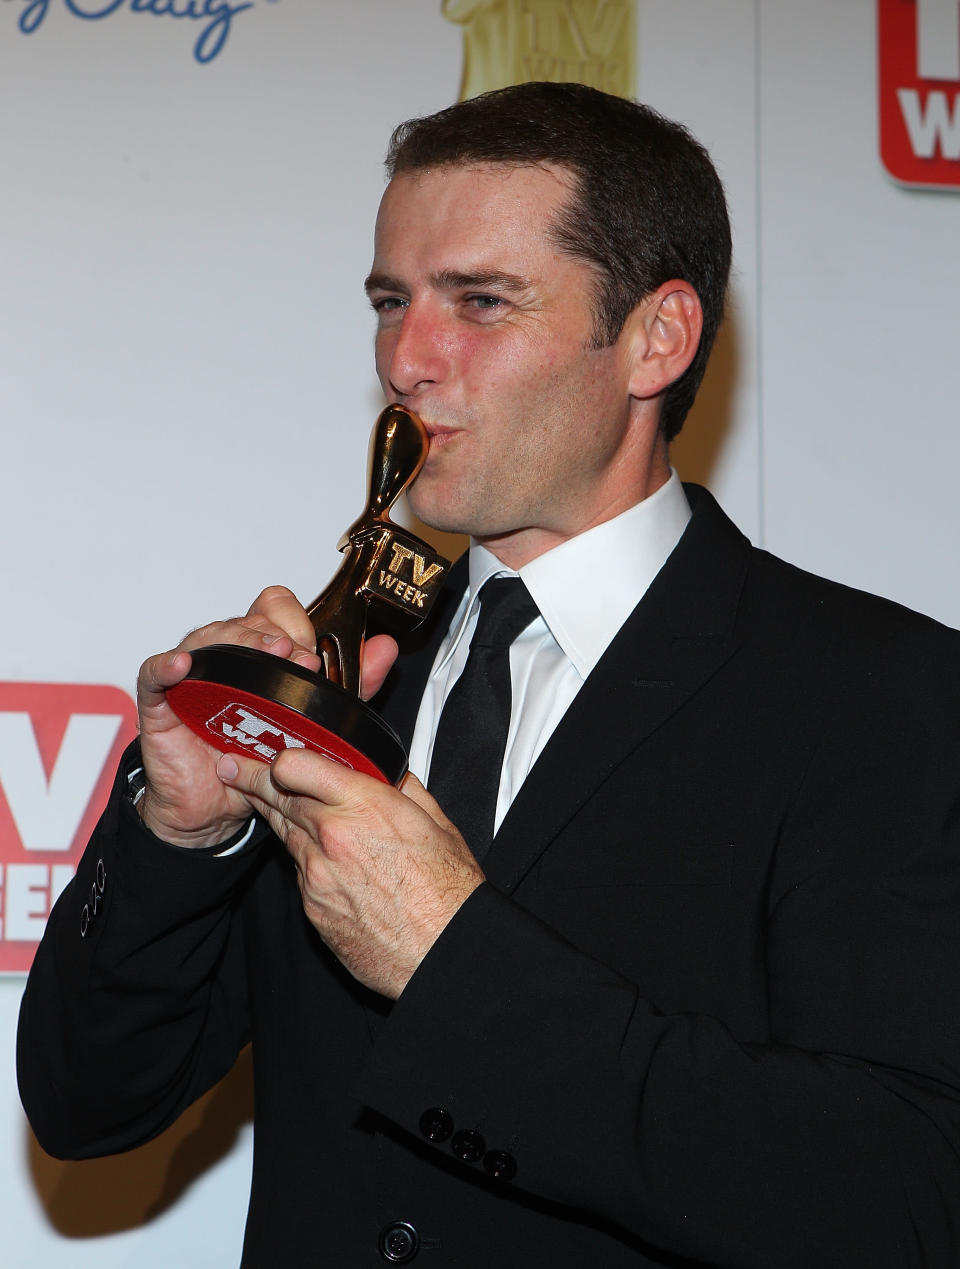 The TV star won the Gold Logie in 2011. Photo: Getty